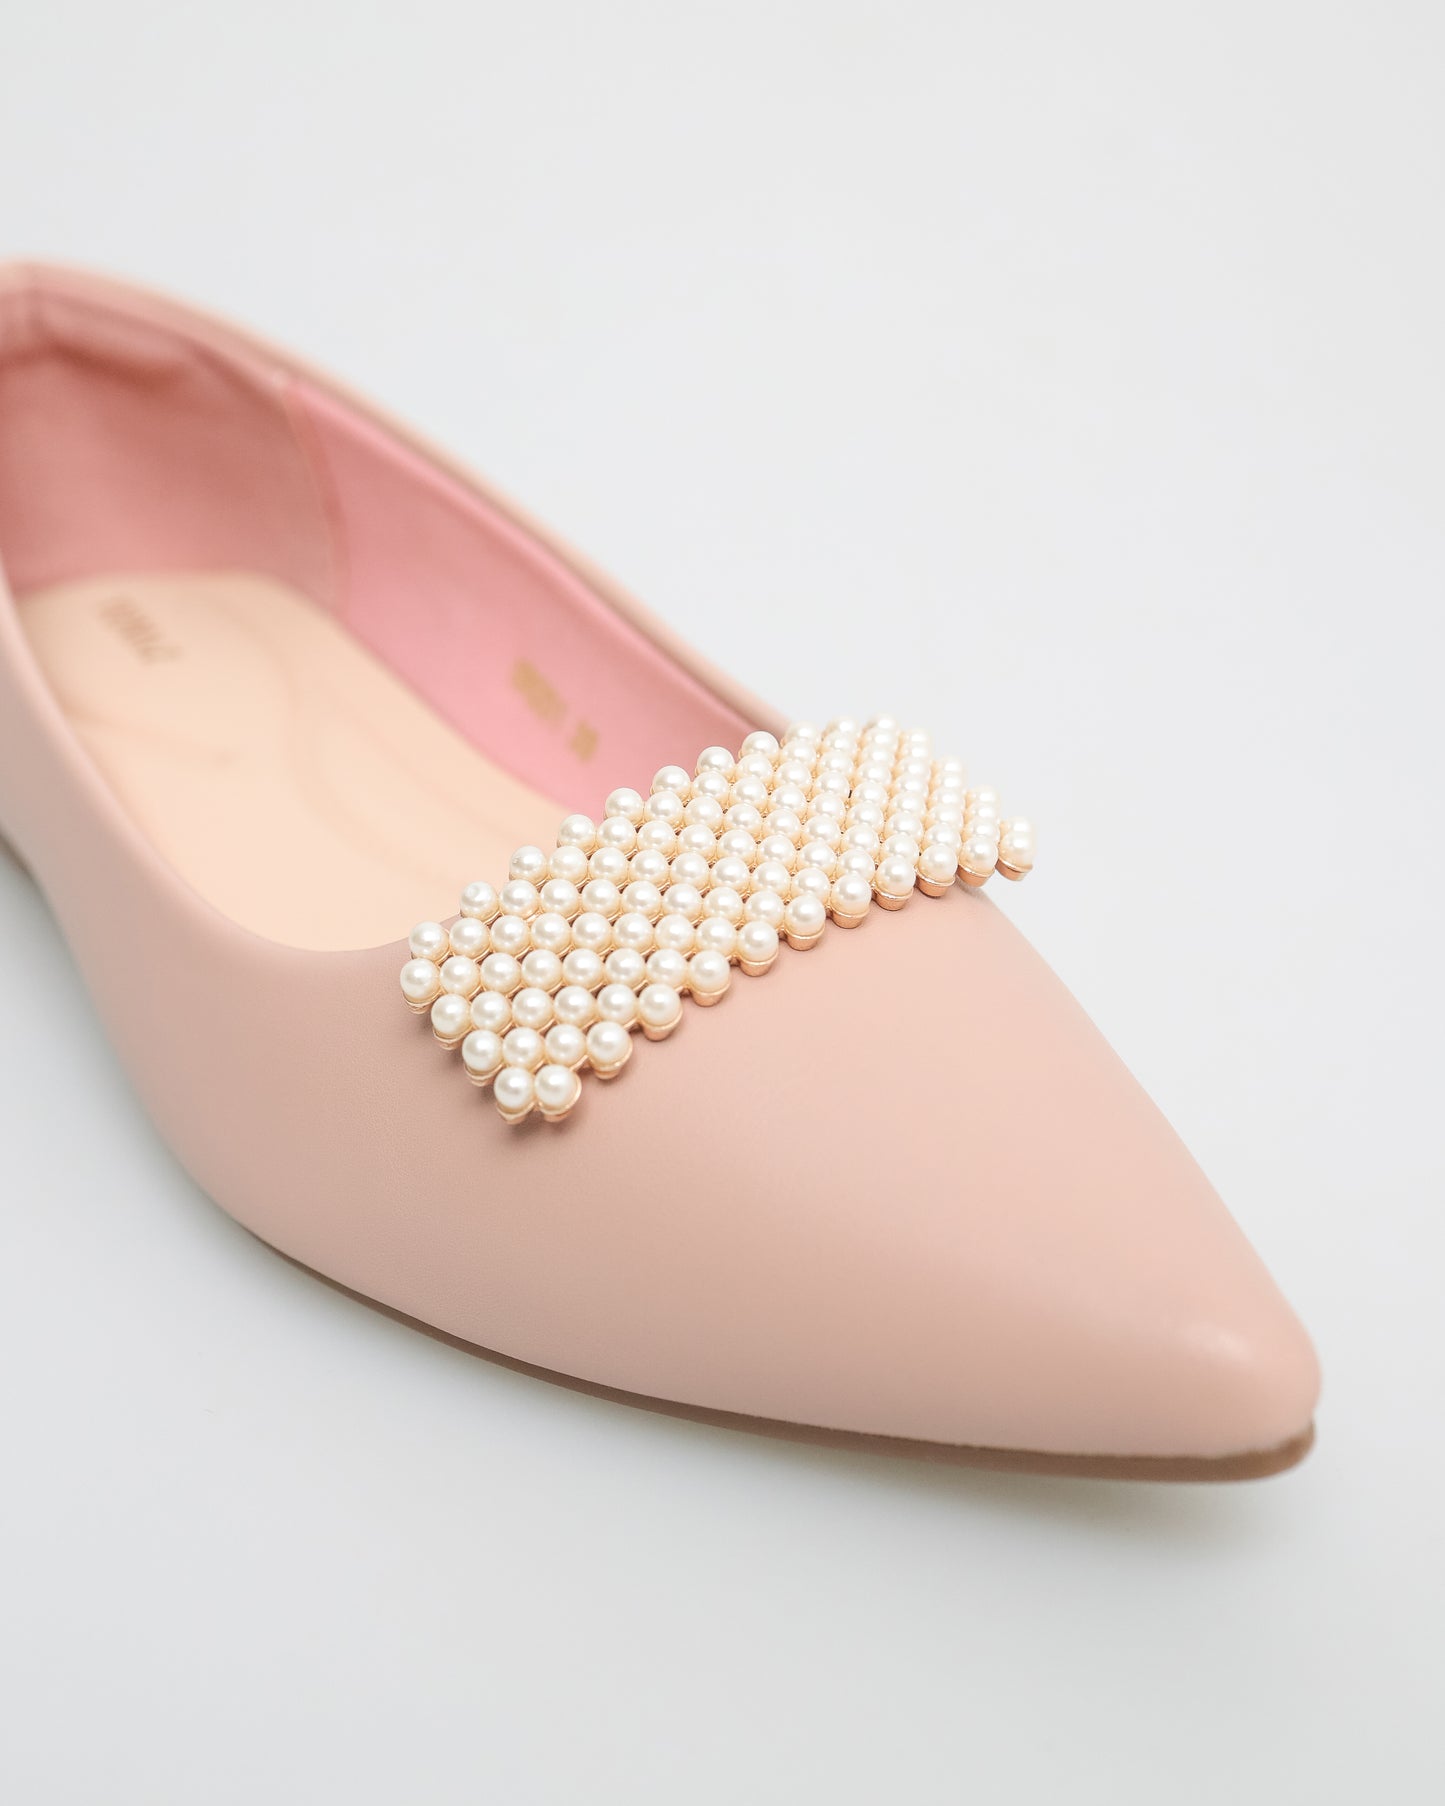 Tomaz NN201 Ladies Pointed-Toe Flats (Pink)